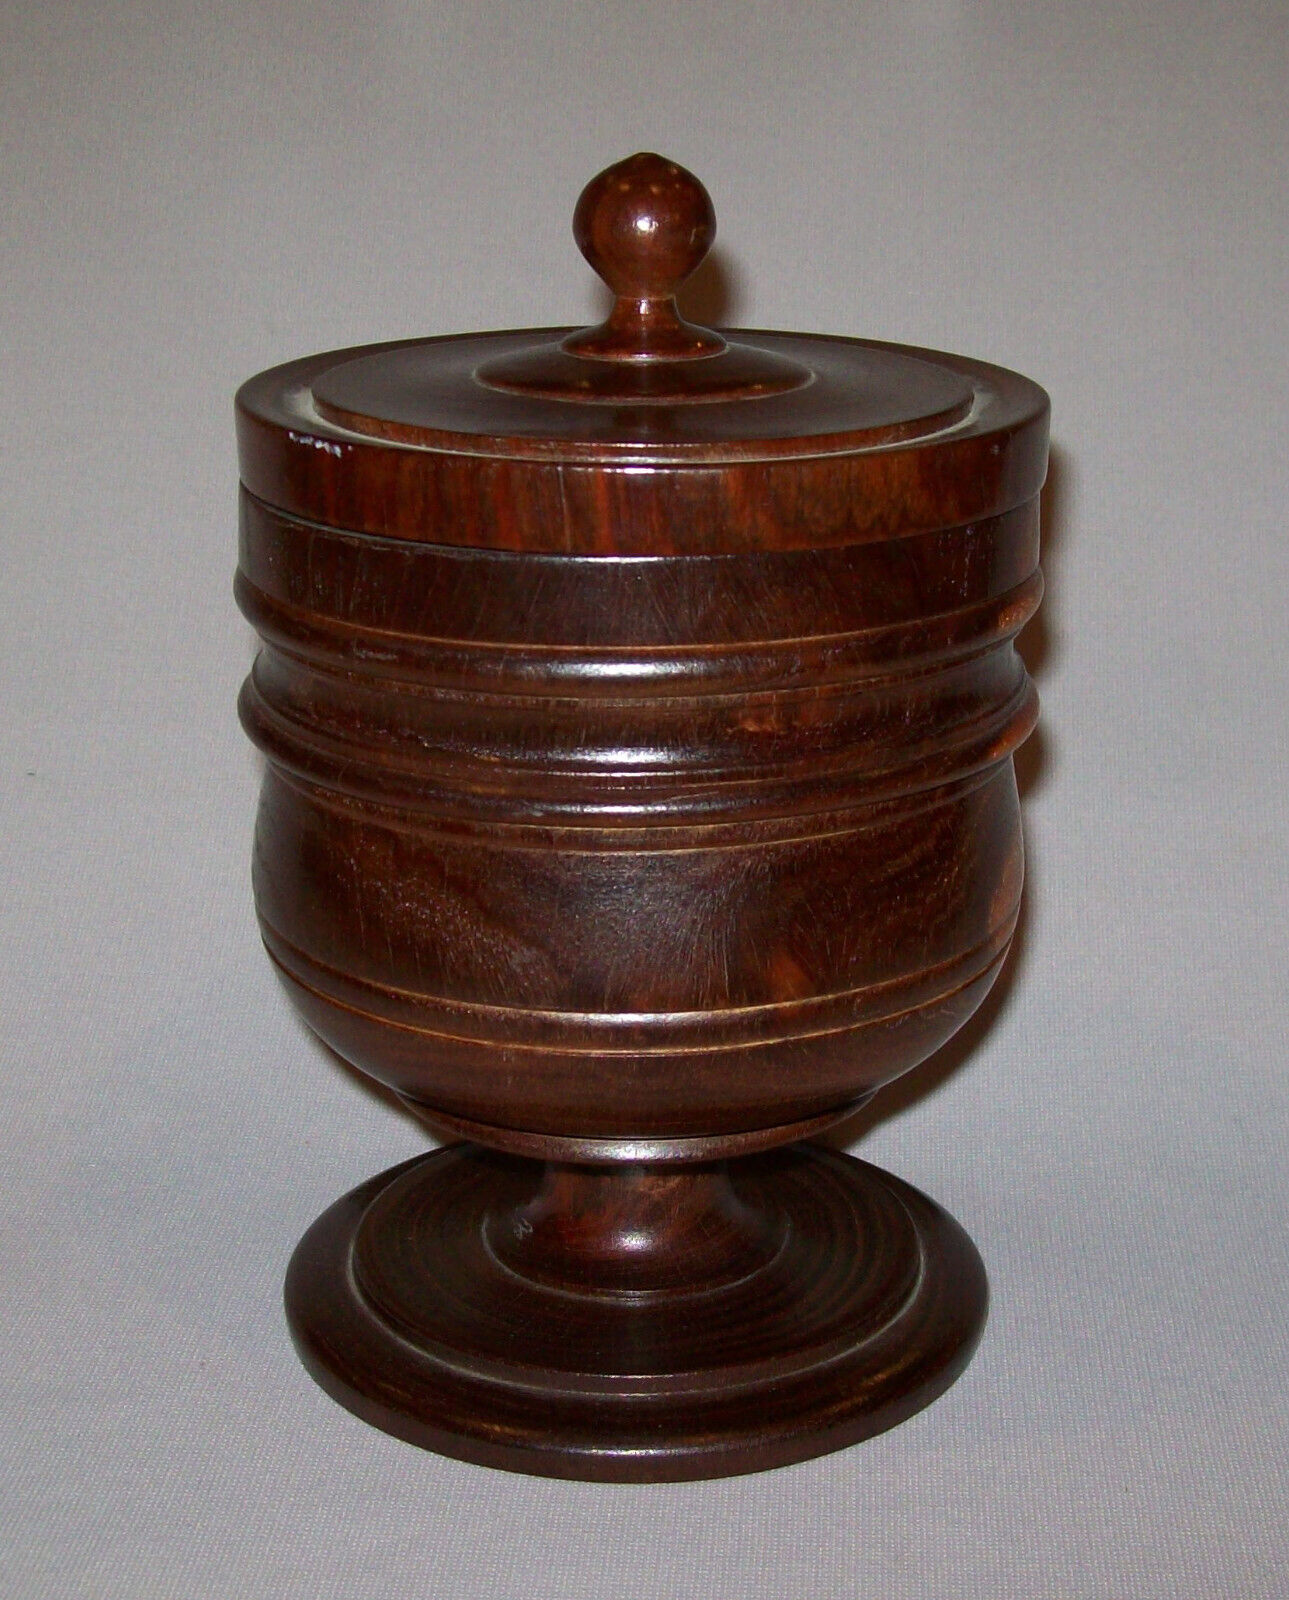 Antique Vtg 19th C 1800s Victorian Lignum Vitae Covered Bowl Footed With Finial